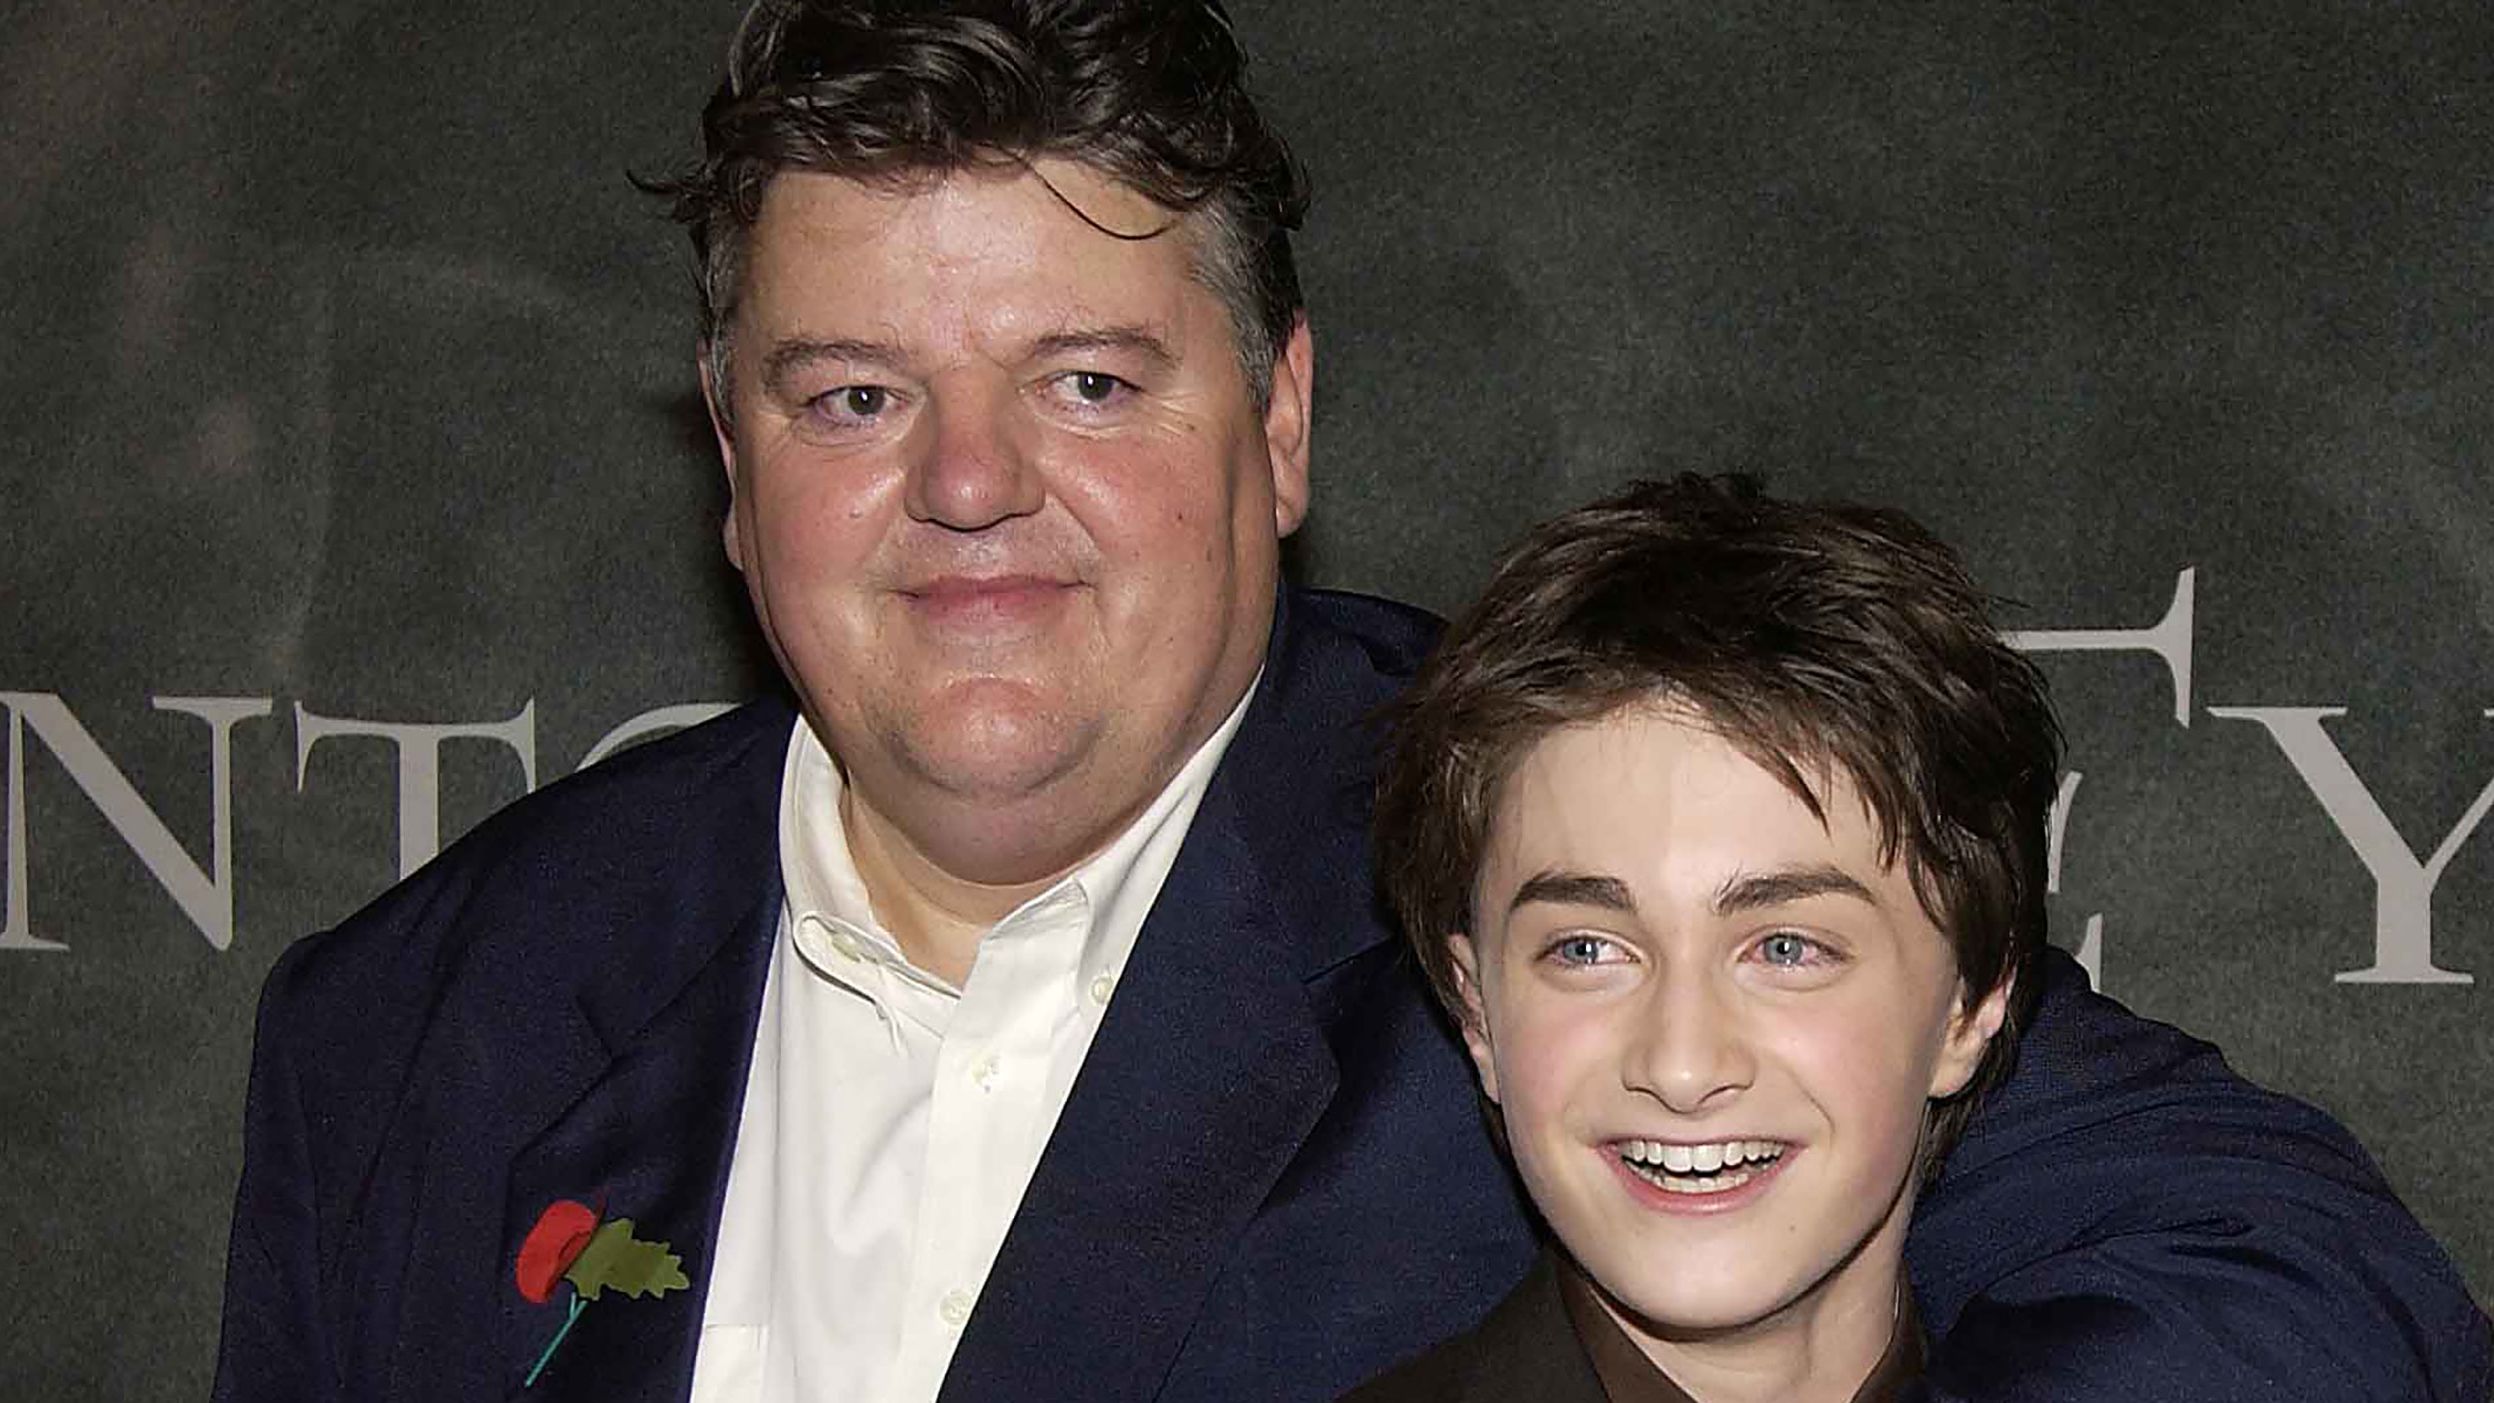 Daniel Radcliffe (right), seen here with Robbie Coltrane at the 'Harry Potter and the Chamber of Secrets' world premiere in London in 2002, paid tribute to his late costar on Friday upon learning of Coltrane's death.